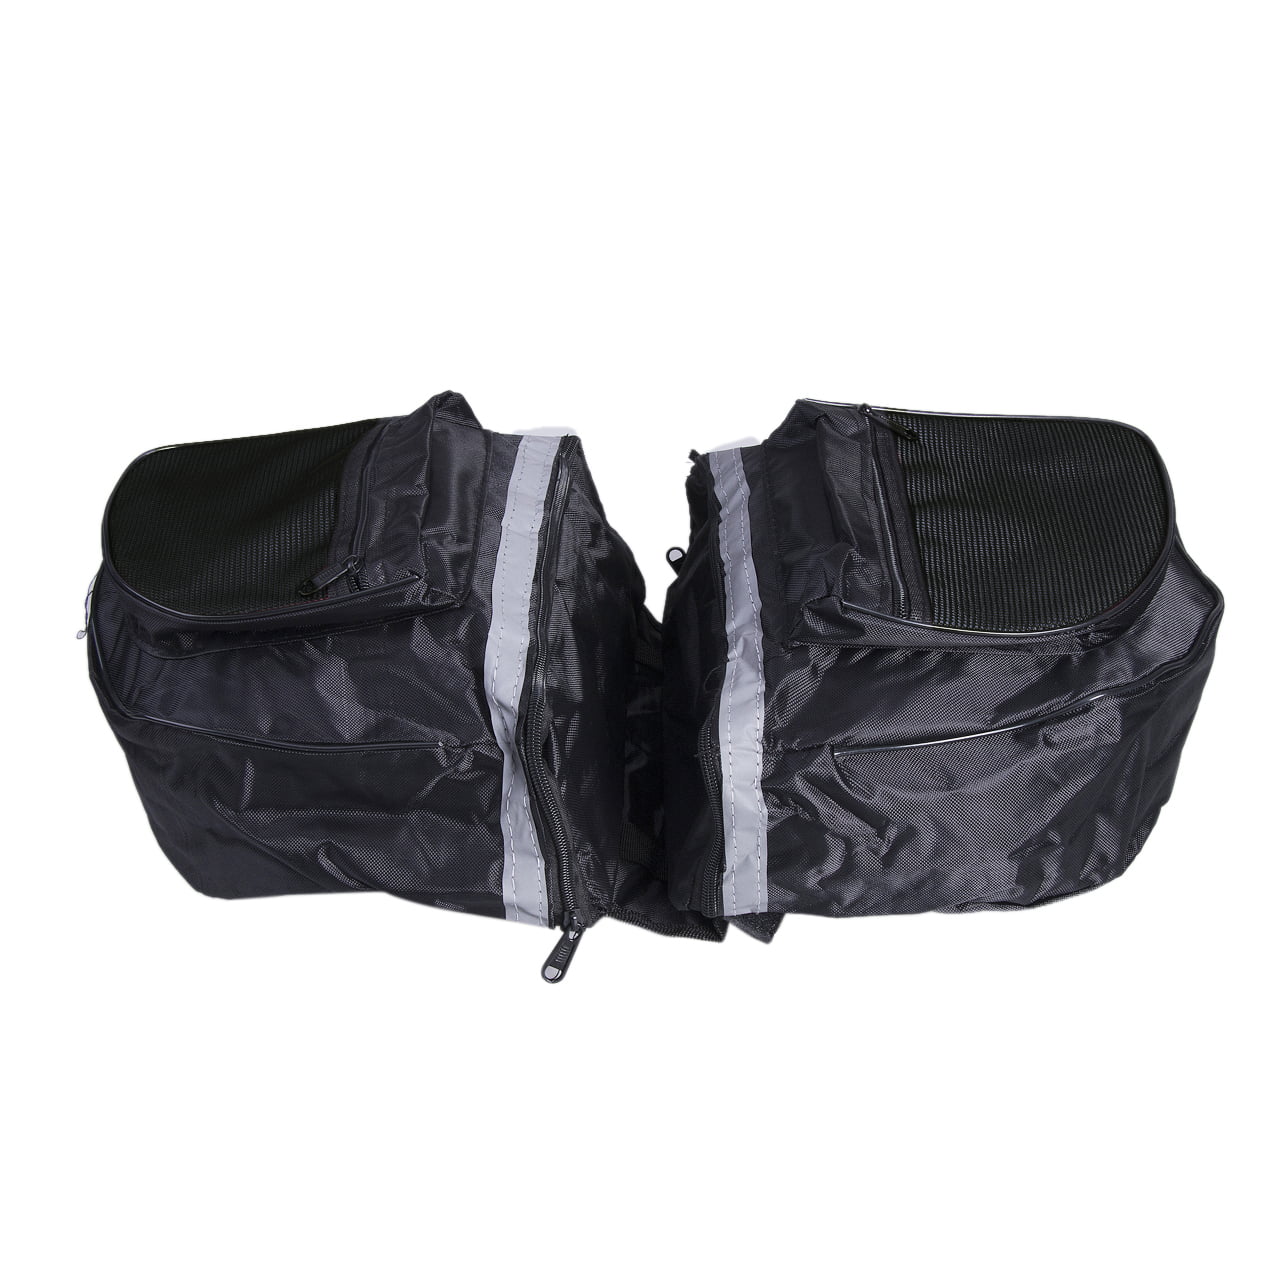 Details about   MTB Bicycle Rear Seat Bag Double Panniers Bag Carrier Bag Bike Luggage Rear Rack 